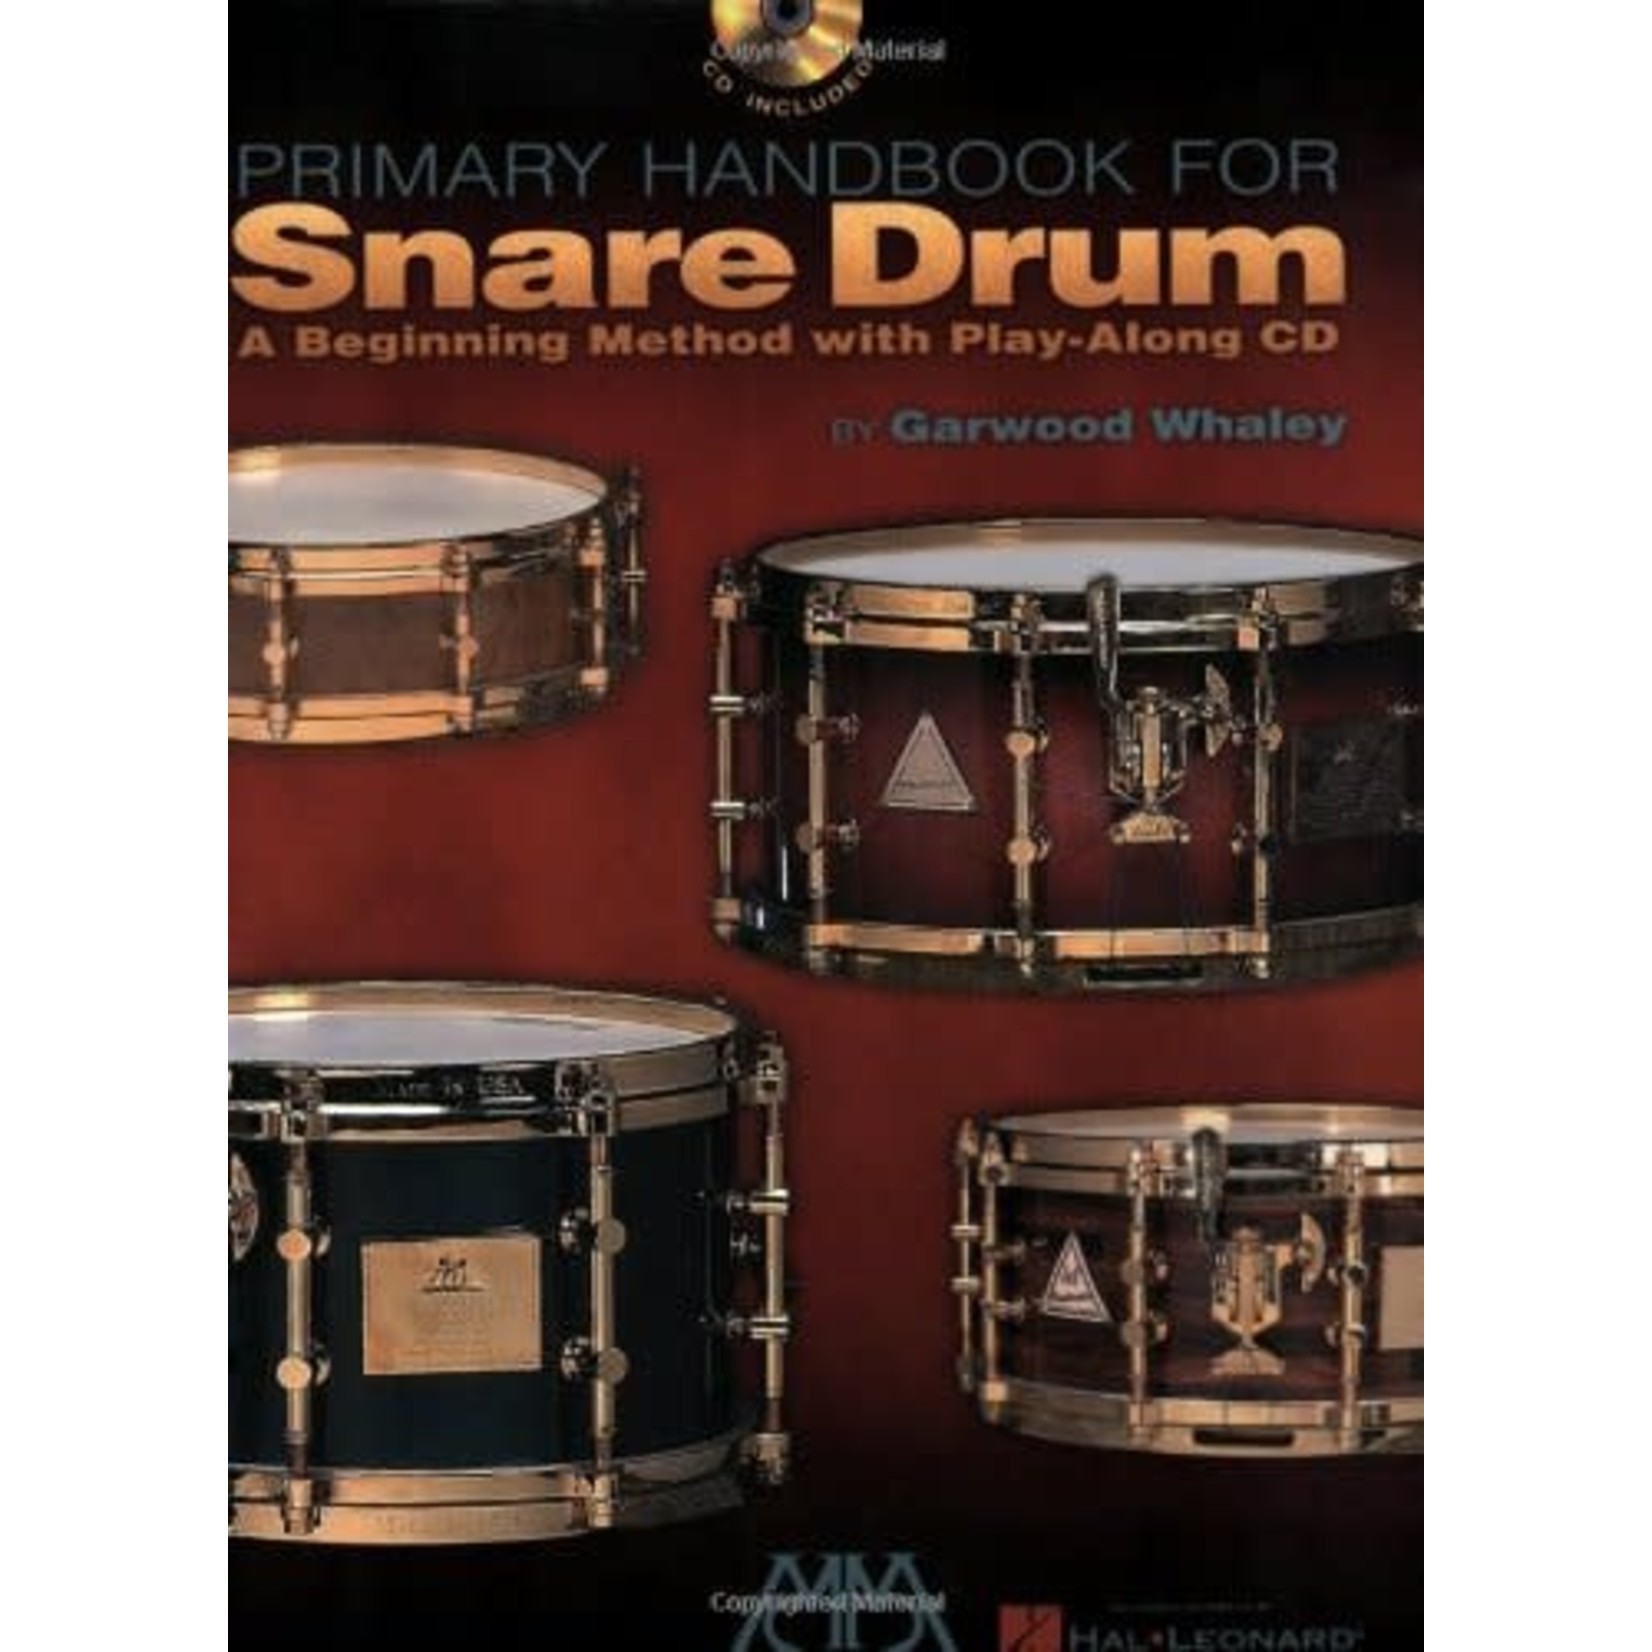 PRIMARY HANDBOOK FOR SNARE DRUM - GARWOOD WHALEY